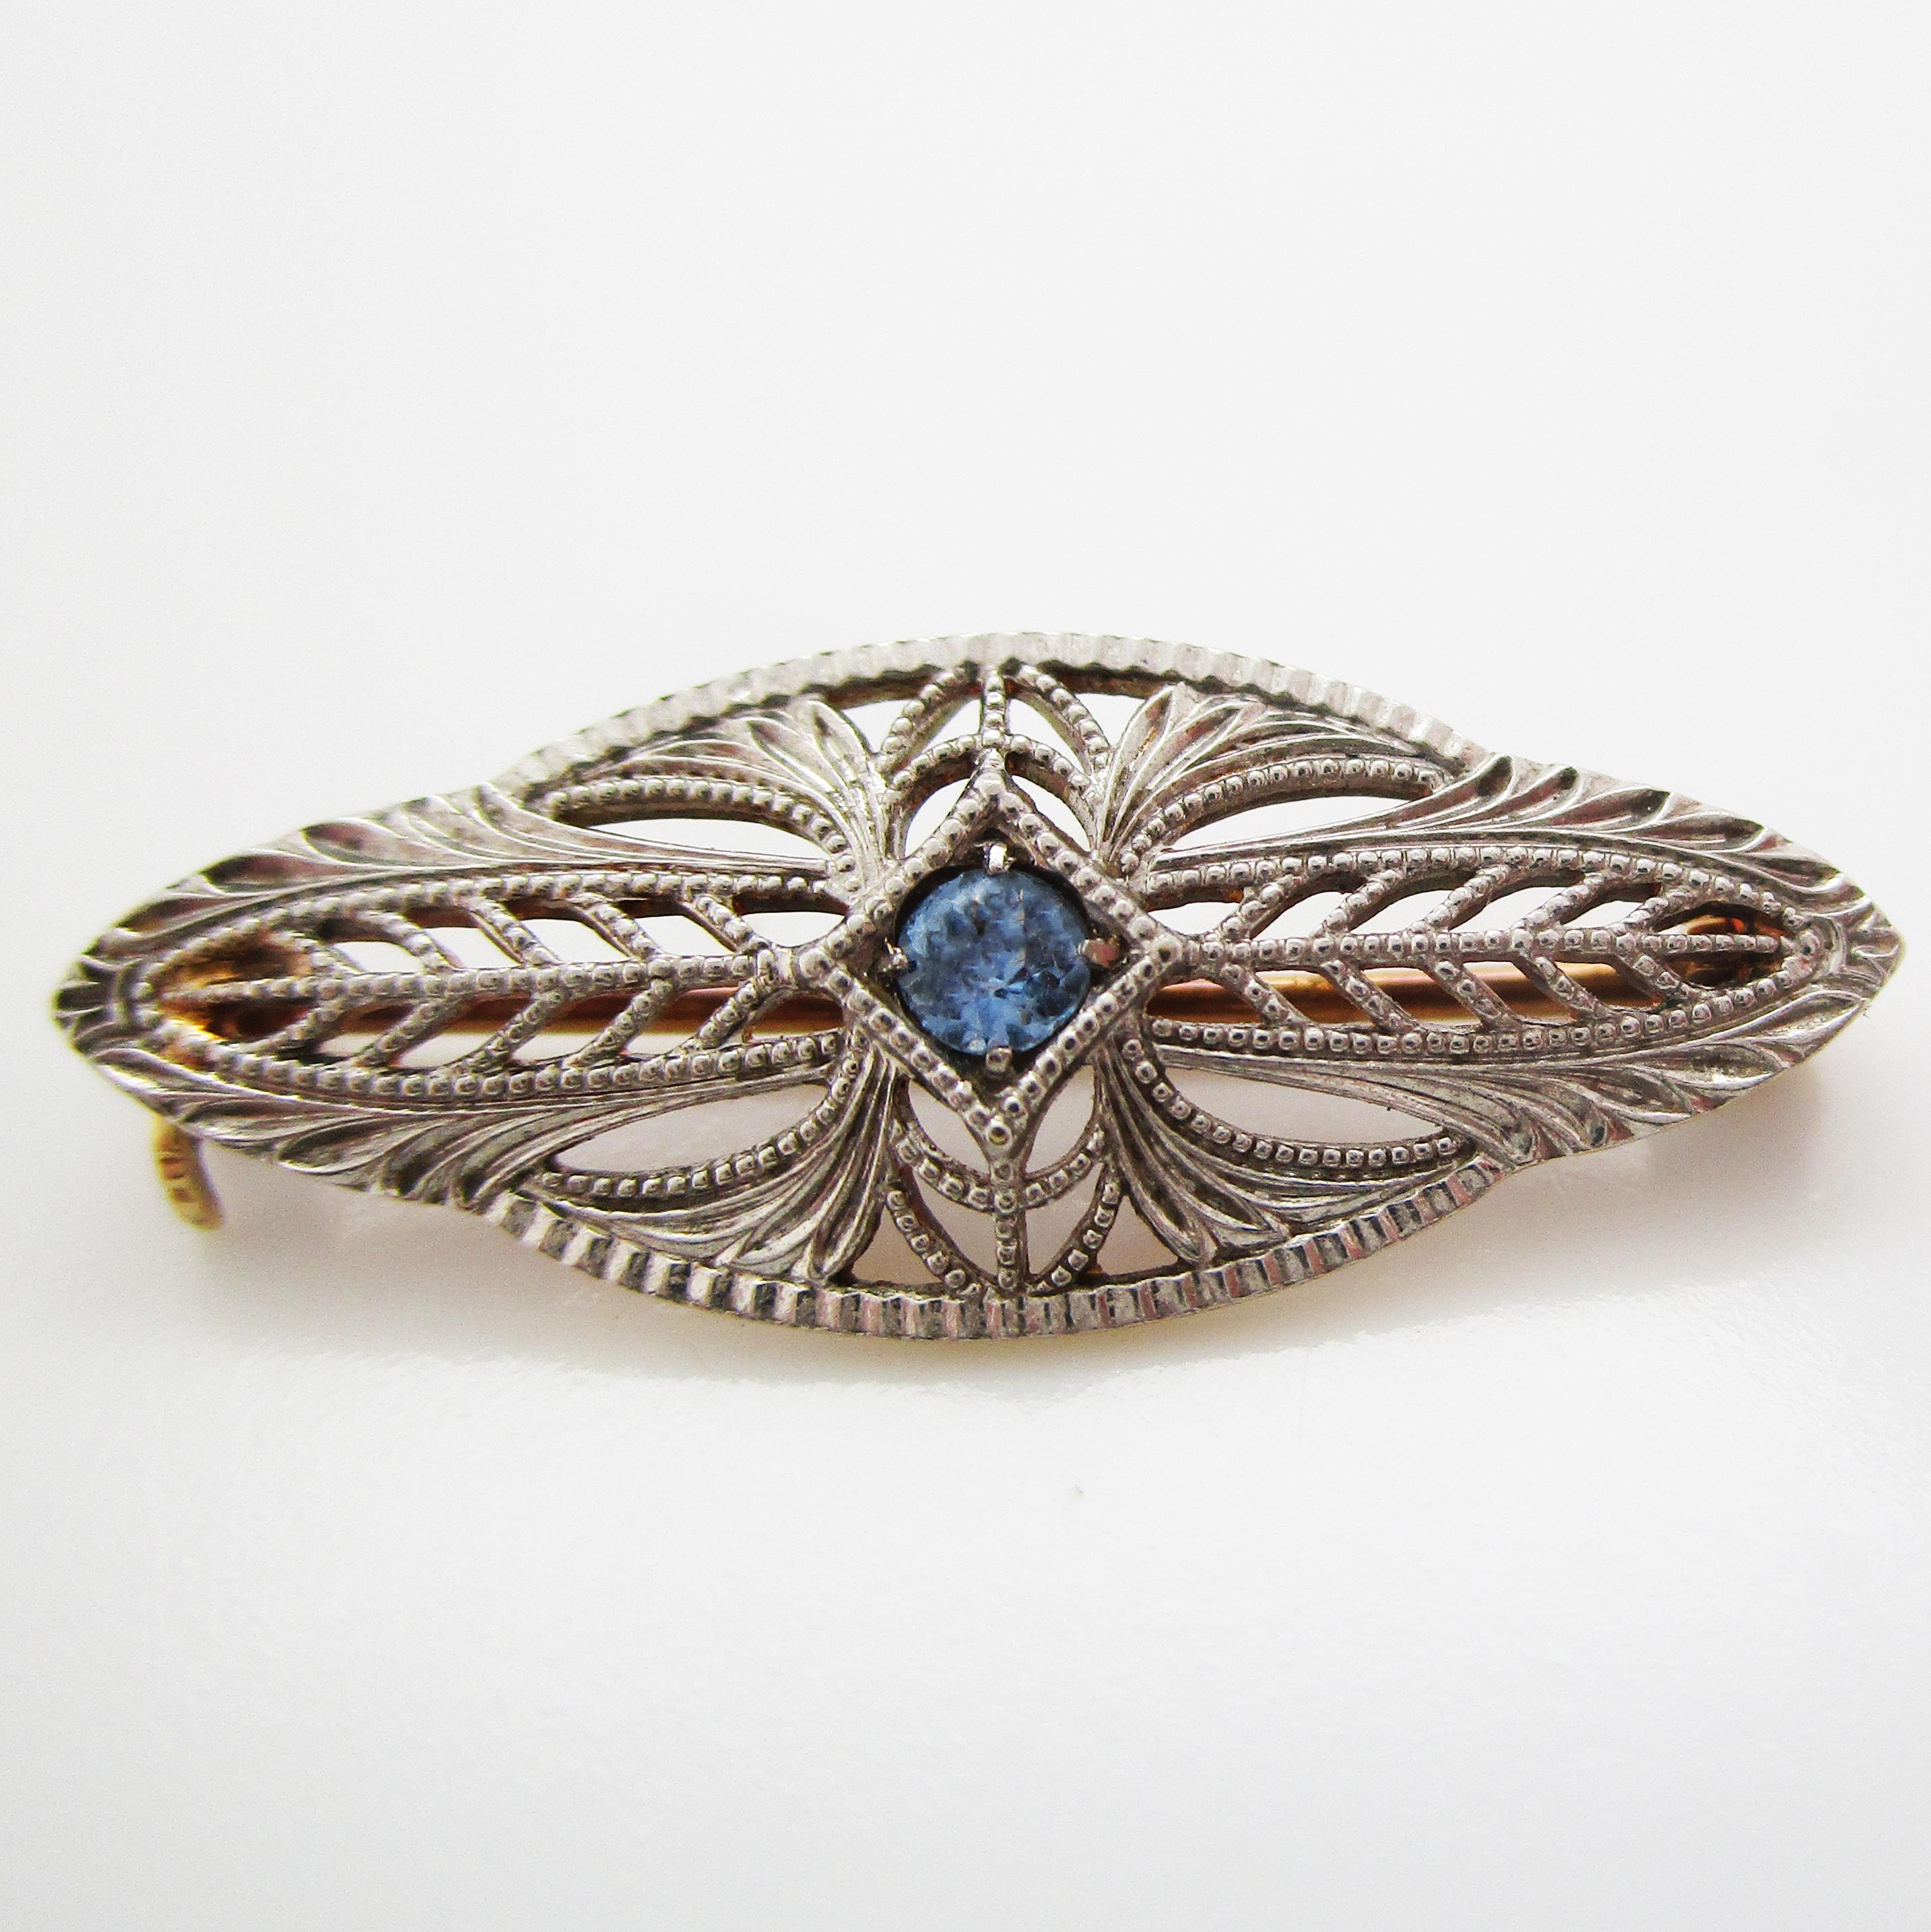 This gorgeous Deco pin is in platinum and has fine filigree details and a stunning Montana sapphire center. The platinum is the perfect contrast against the steely blue sapphire, and the filigree details create a lacey look that will go with